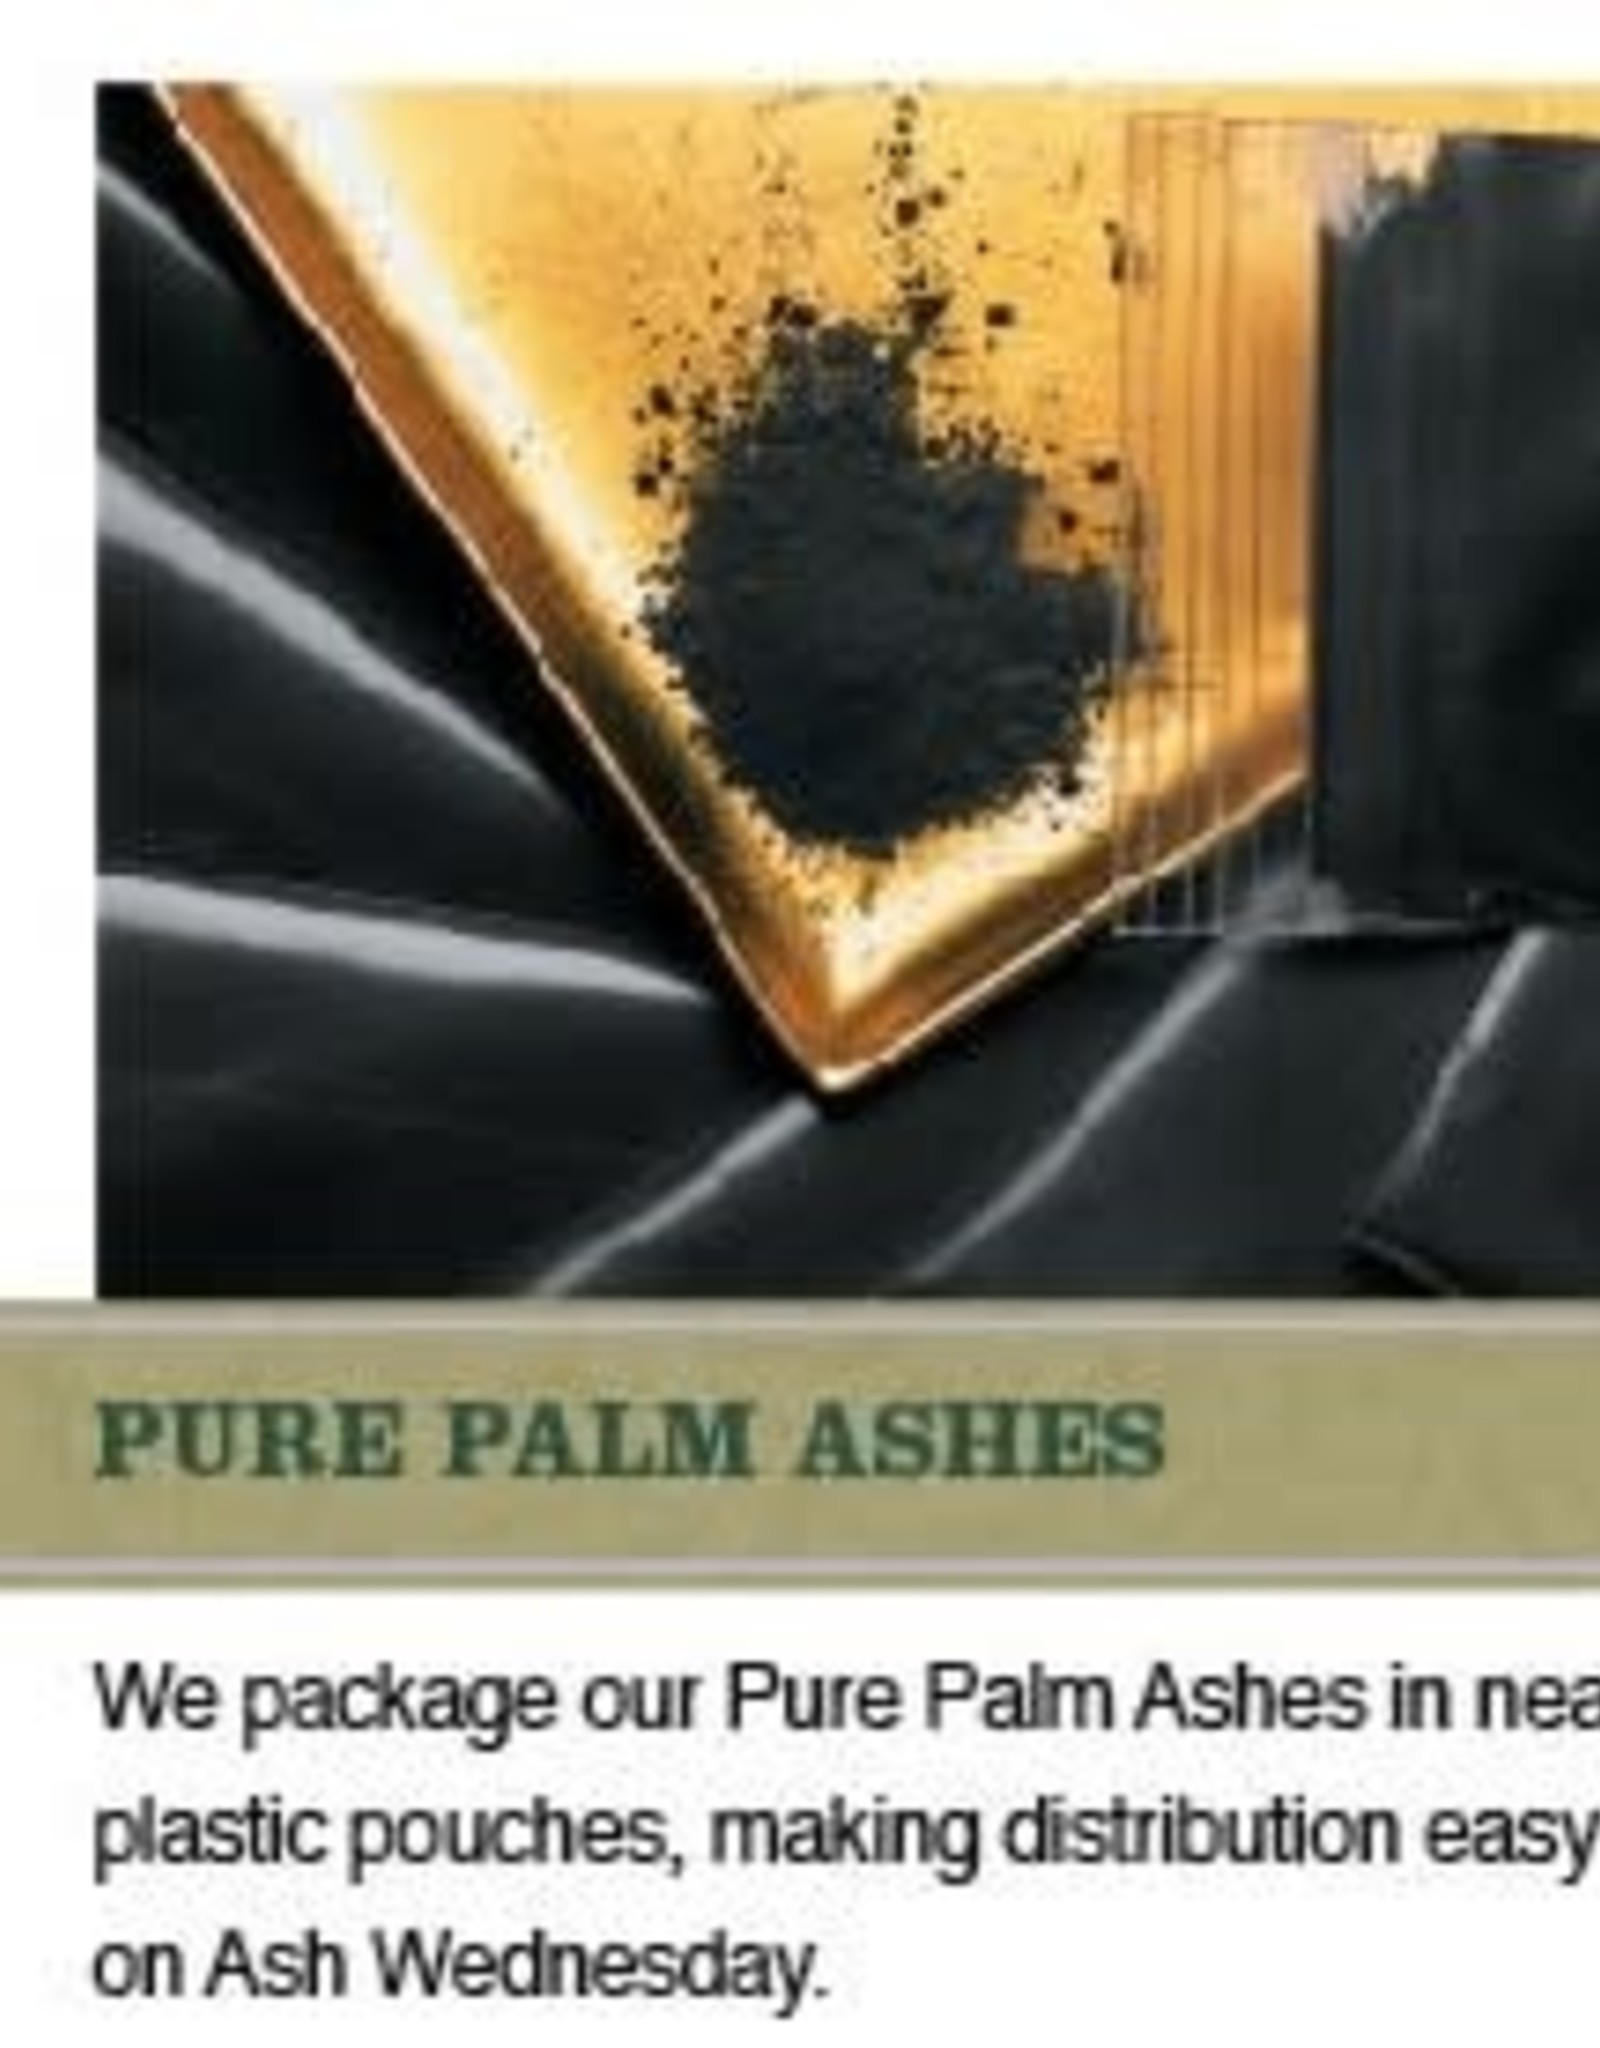 Ashes (Enough for 1000 People) for Ash Wednesday